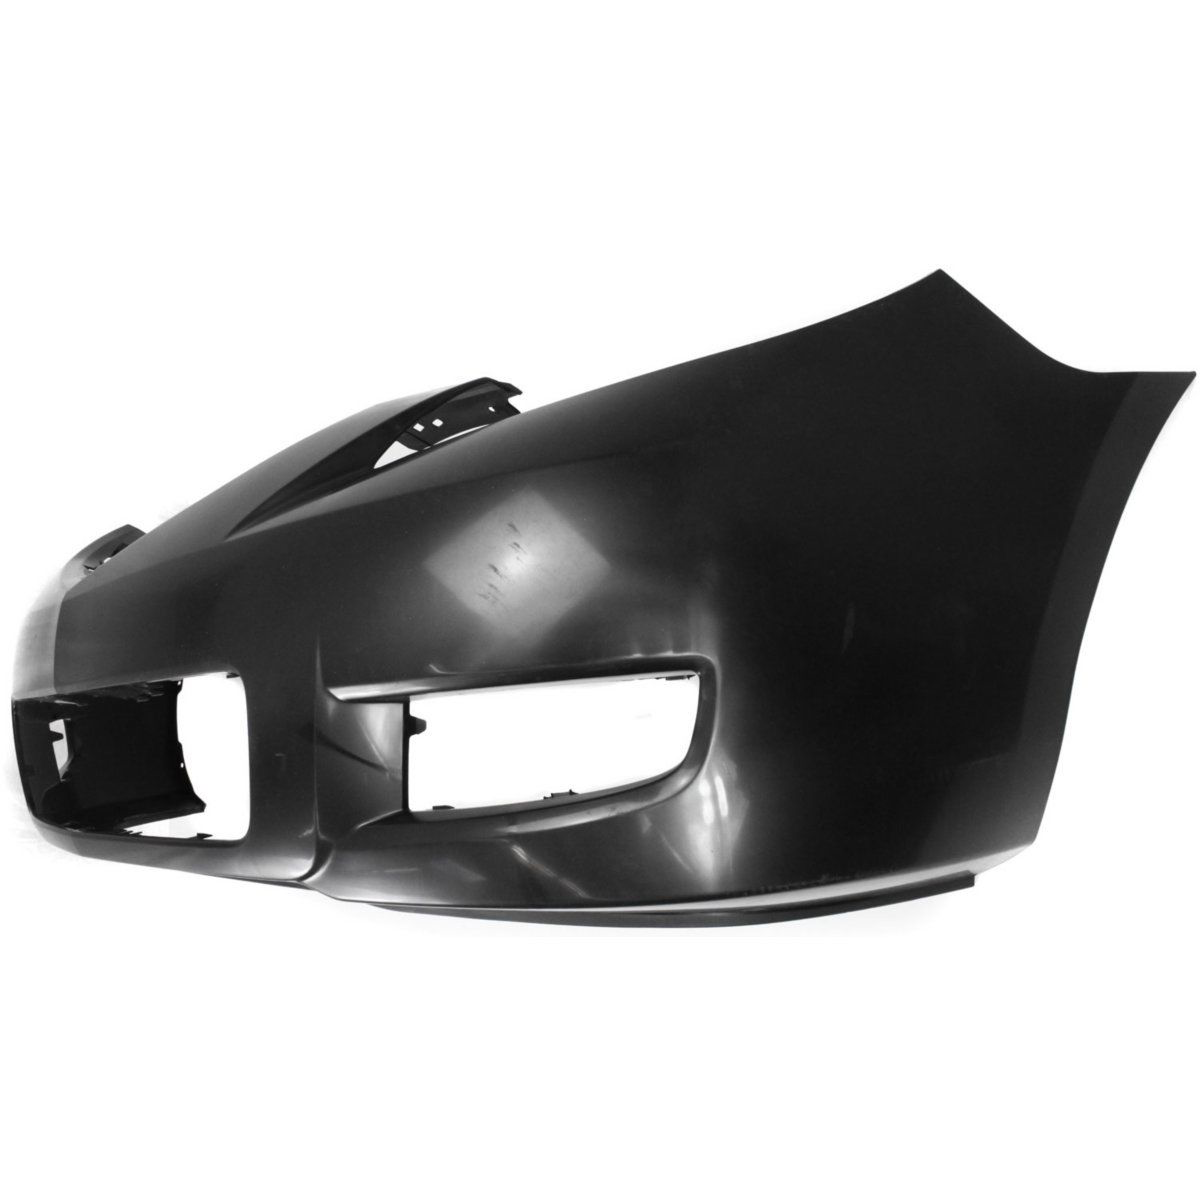 2007-2009 MAZDA 3 Front Bumper Cover 4dr sedan  standard type Painted to Match